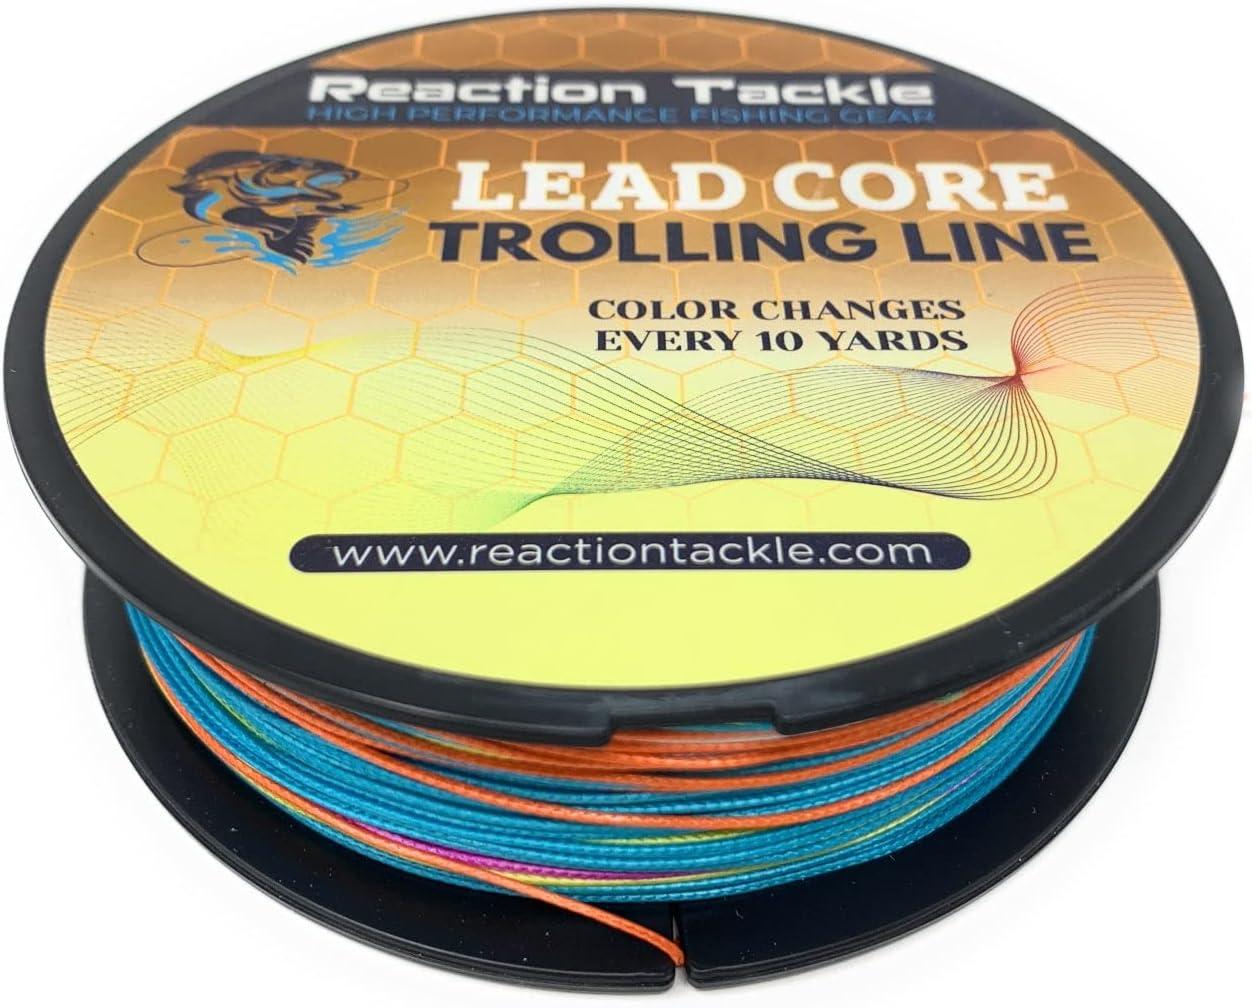 Reaction Tackle Lead Core, Metered Trolling Braided Line, Fast Sinking Line,  Color Changes Every 10 Yards Multi-Color 12LB (100 yards)